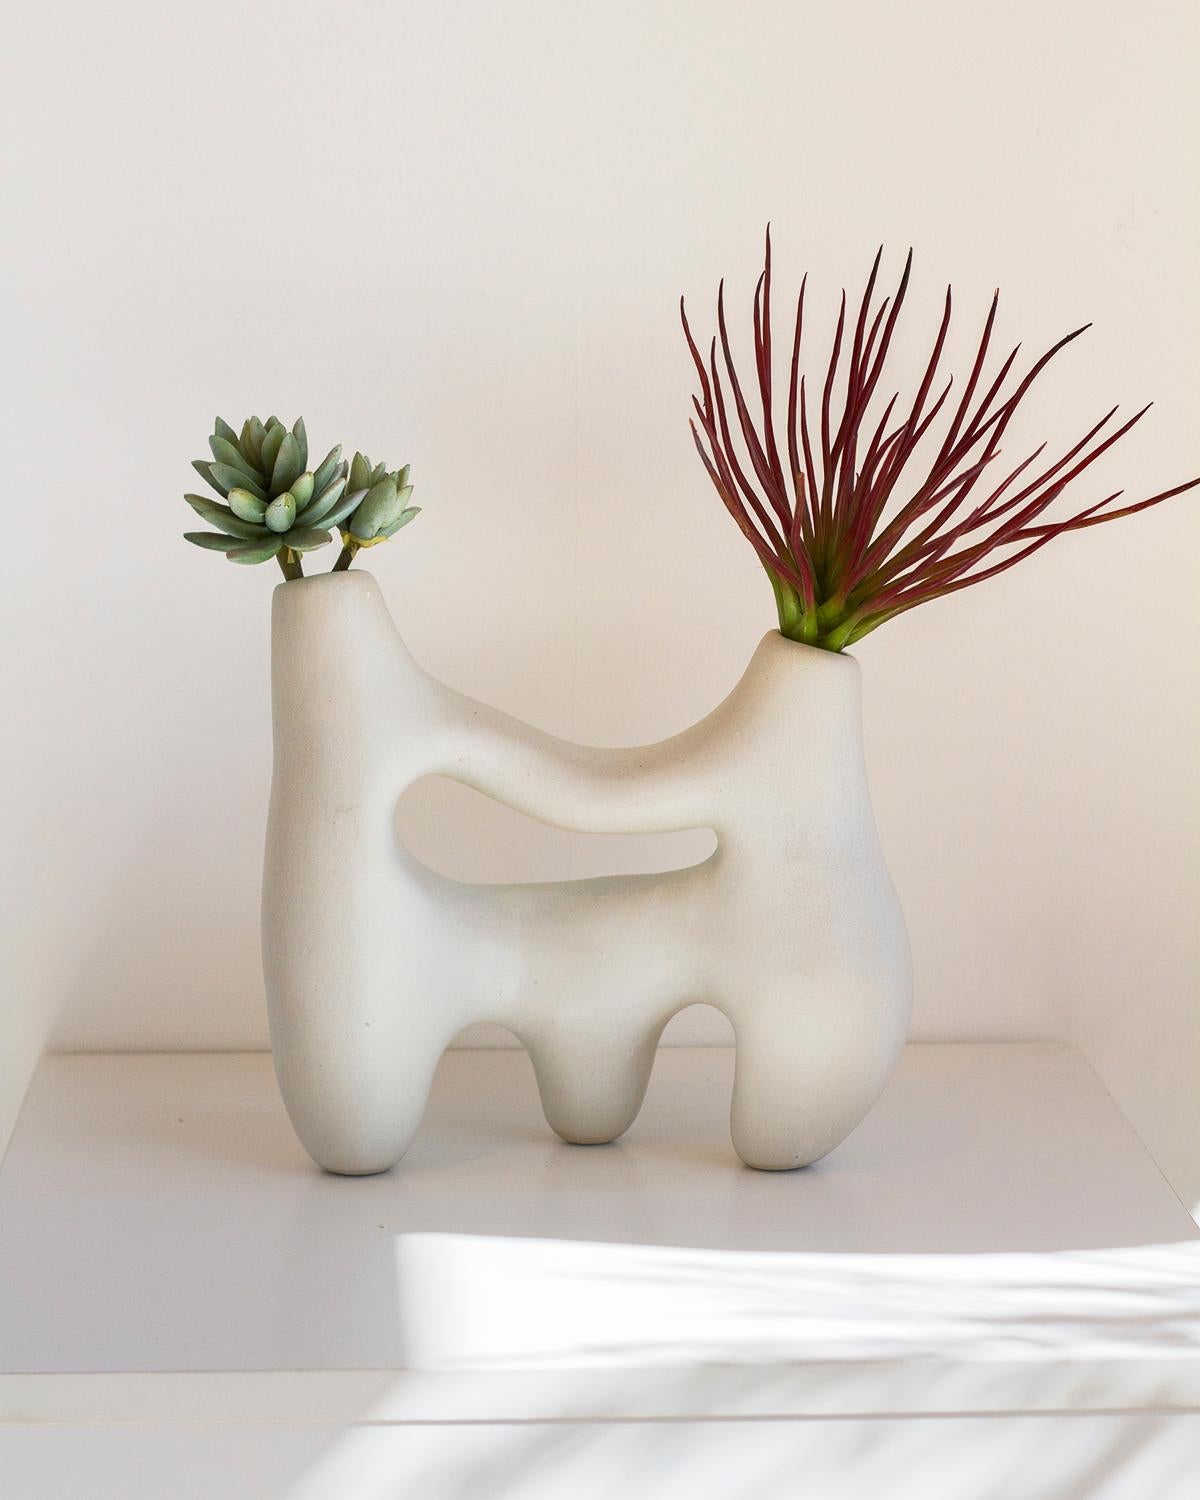 This Symbiosis Clay Vase is a unique sculptural vase made of white clay. Its rustic yet minimalist look is perfect for organic modern and futuristic décor schemes. Handmade with care, this bone white vase makes a great holiday gift.

Only one of